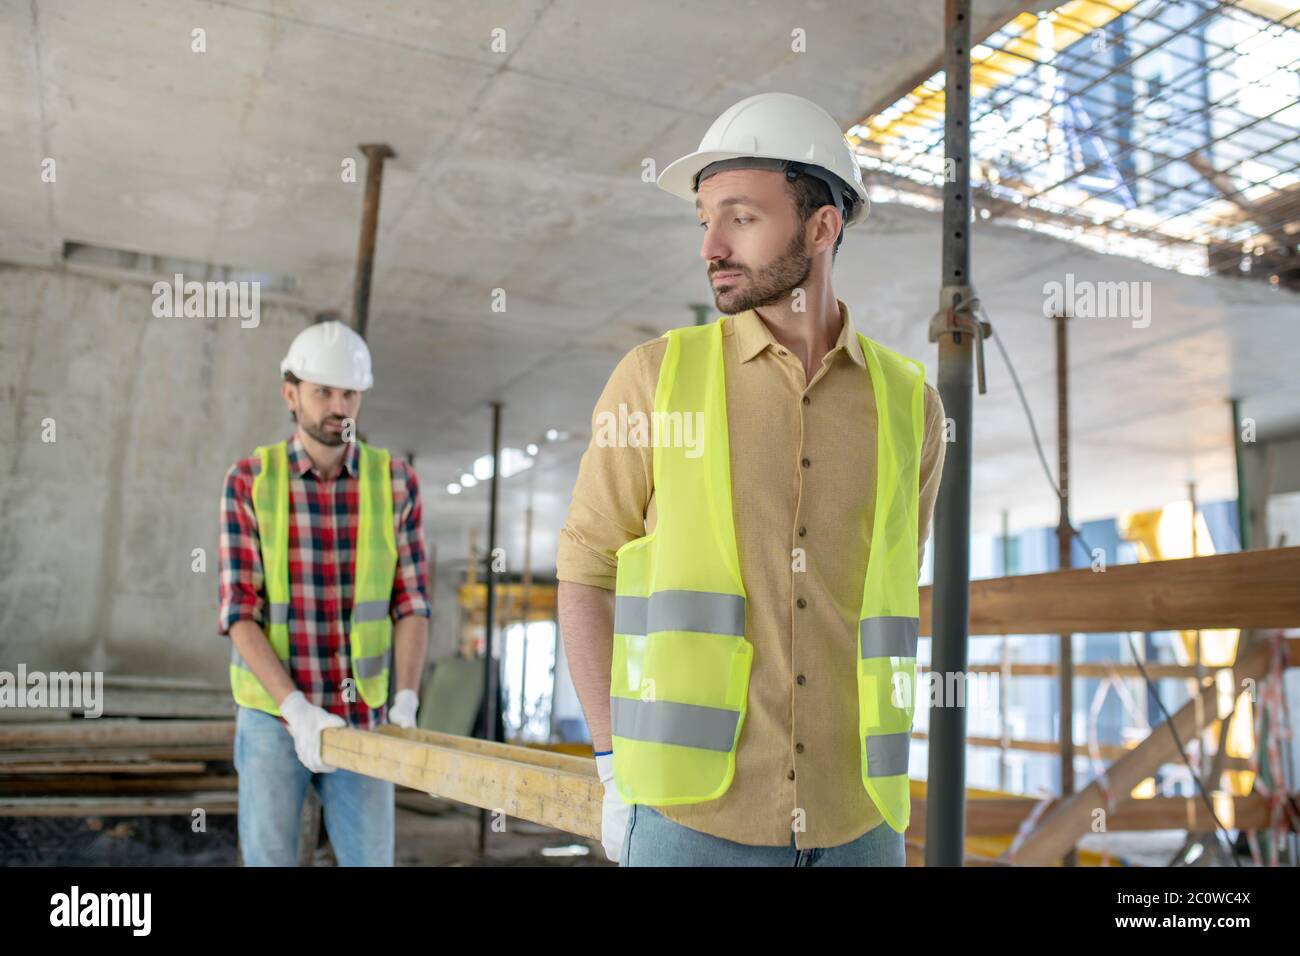 Building workers in yellow vests and gloves carrying wooden board together Stock Photo